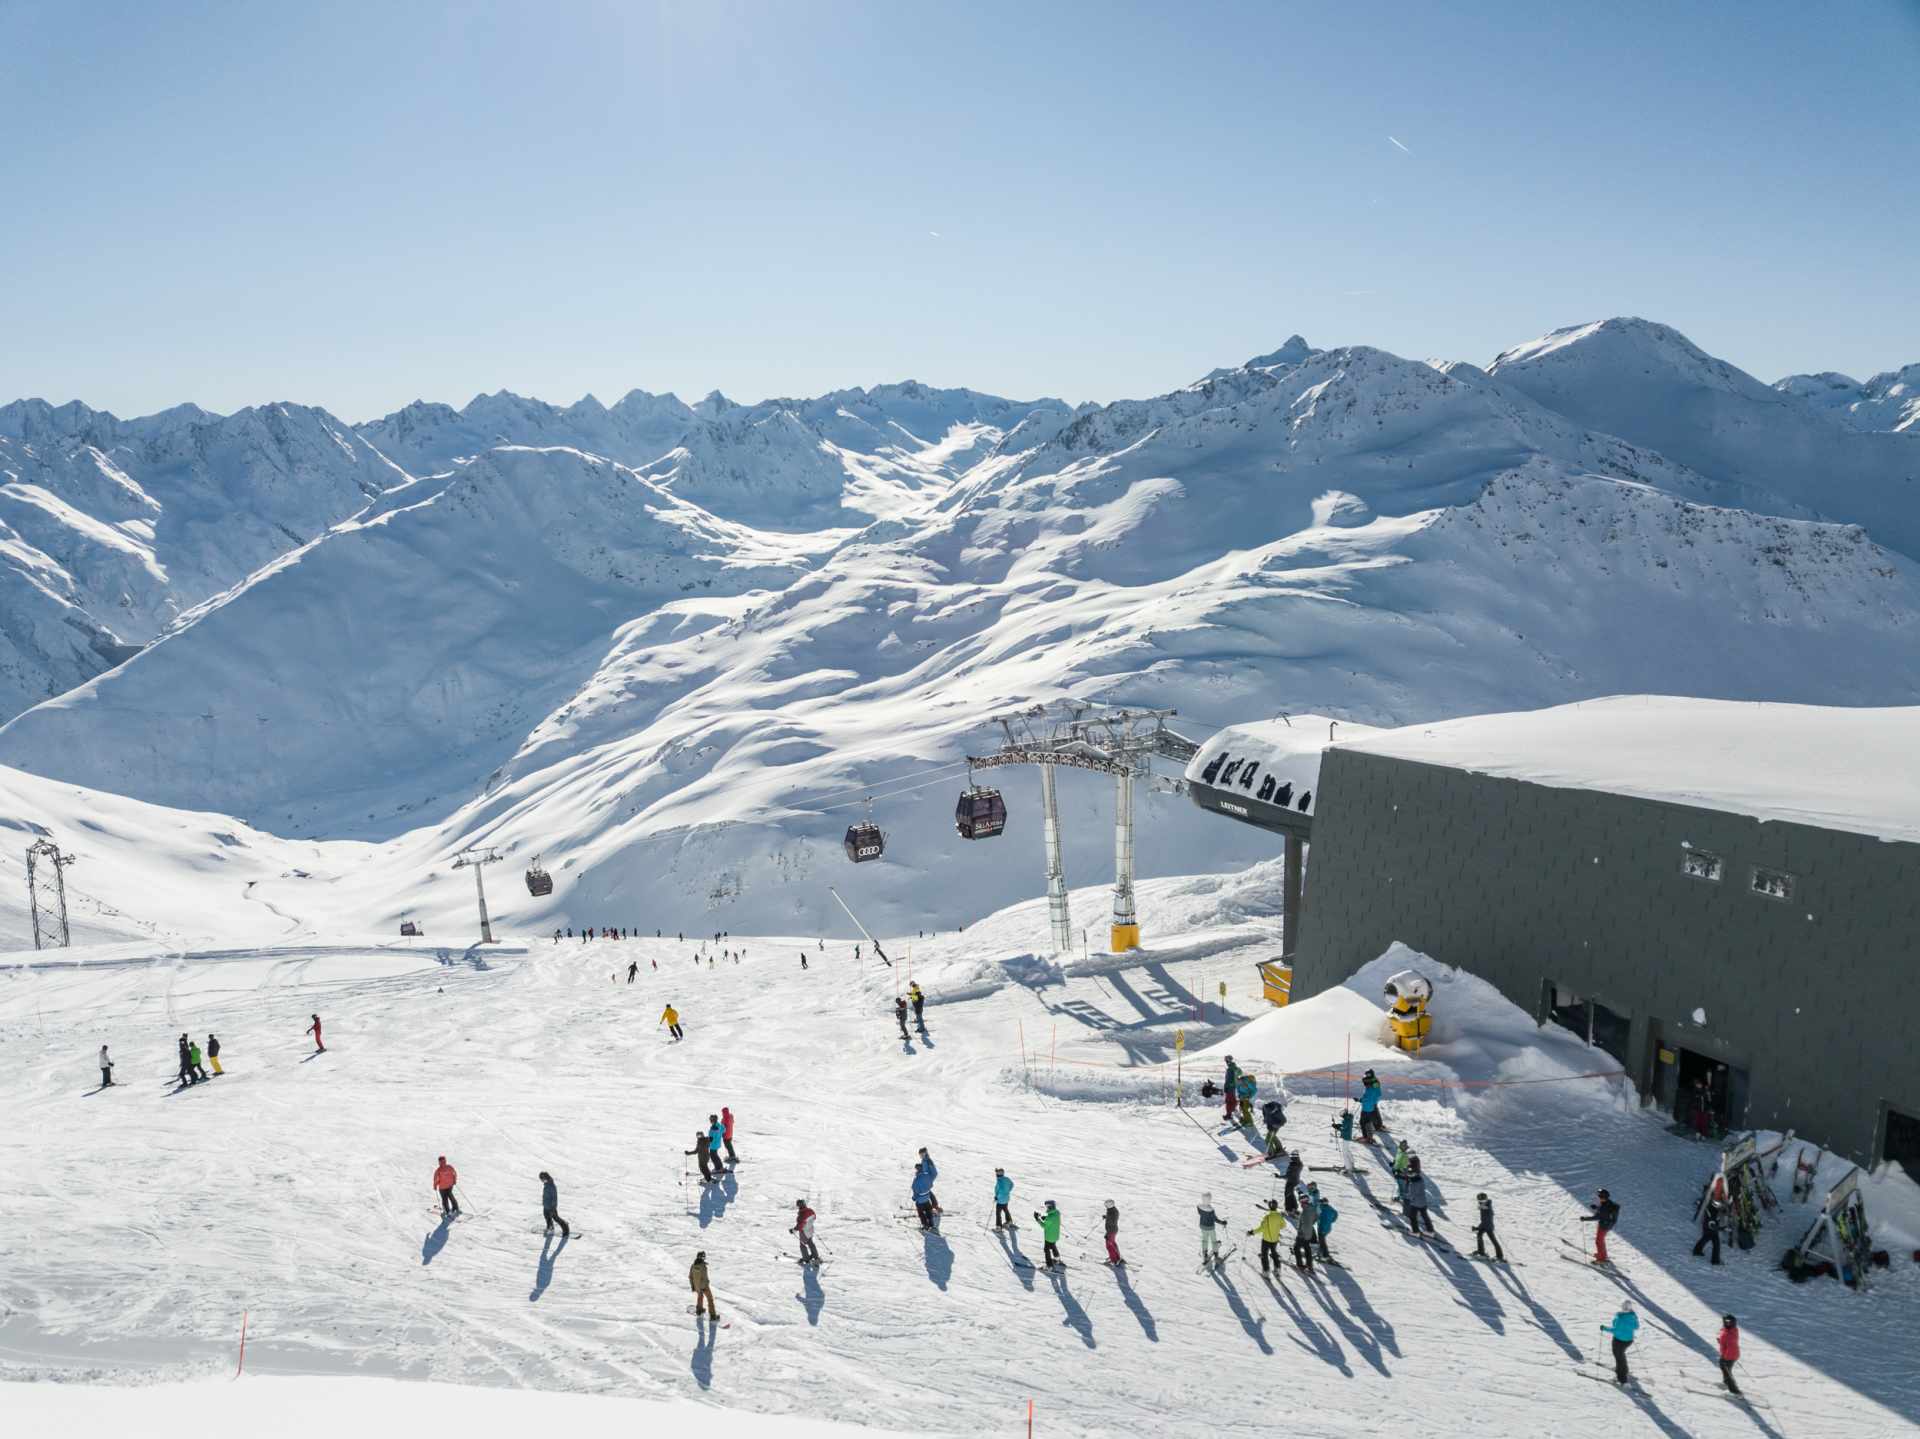 The snow-assured region of Andermatt is prized for all types of winter sport.